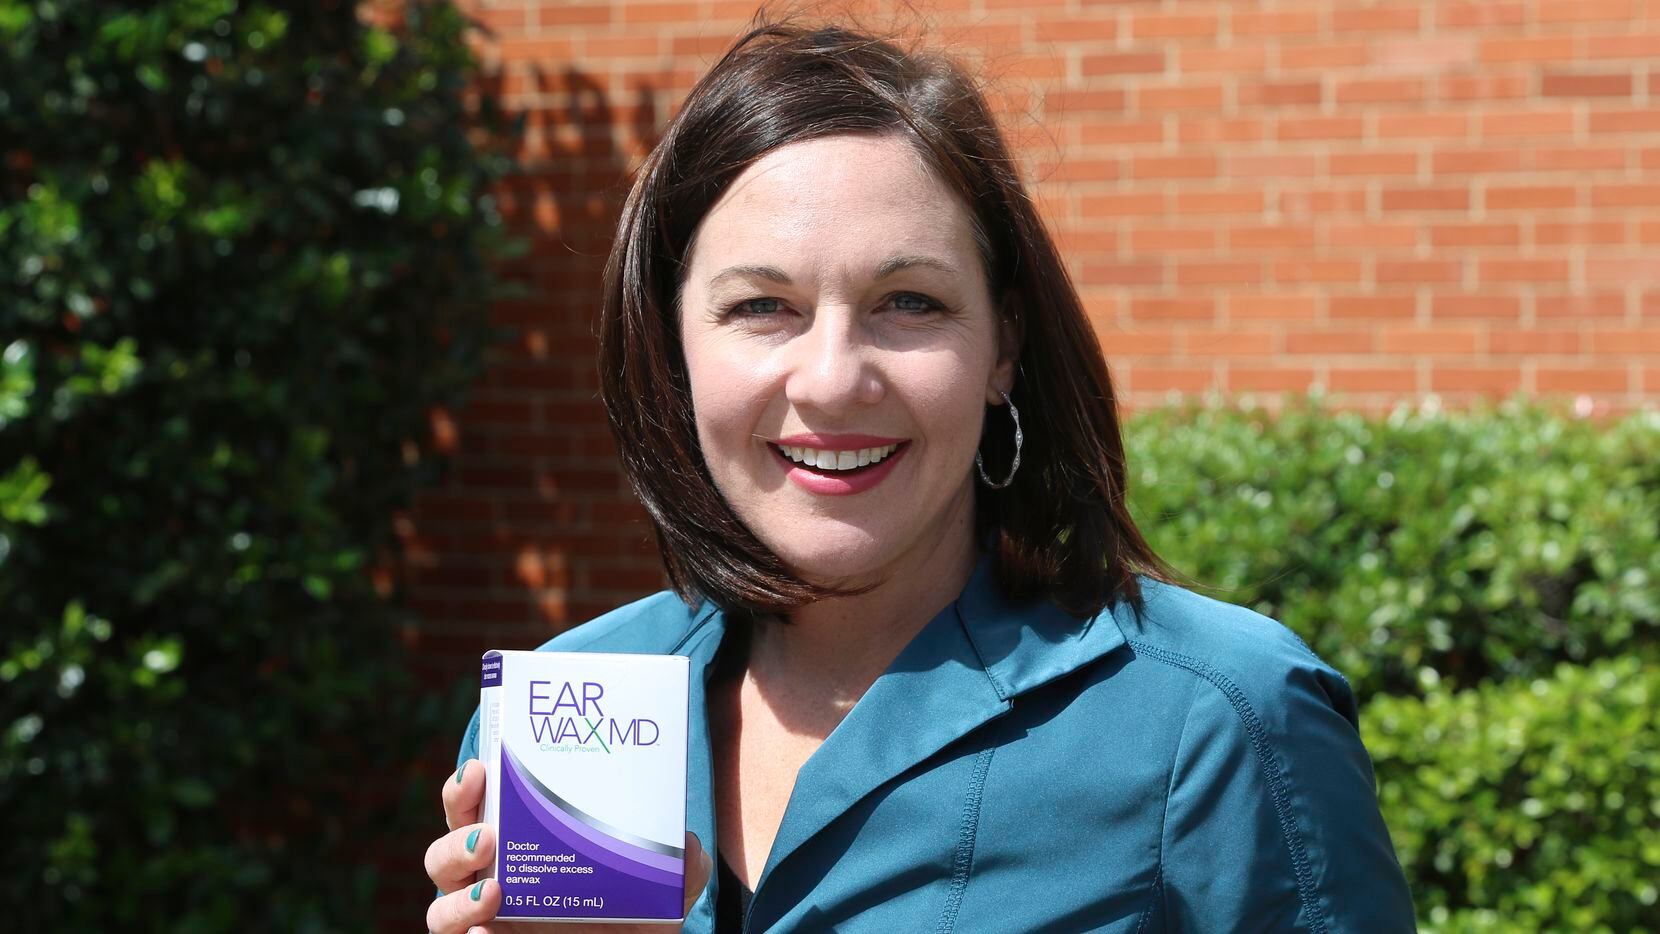 Elyse Stoltz Dickerson, a CEO and founder of Eosera takes a photo with her new earwax...